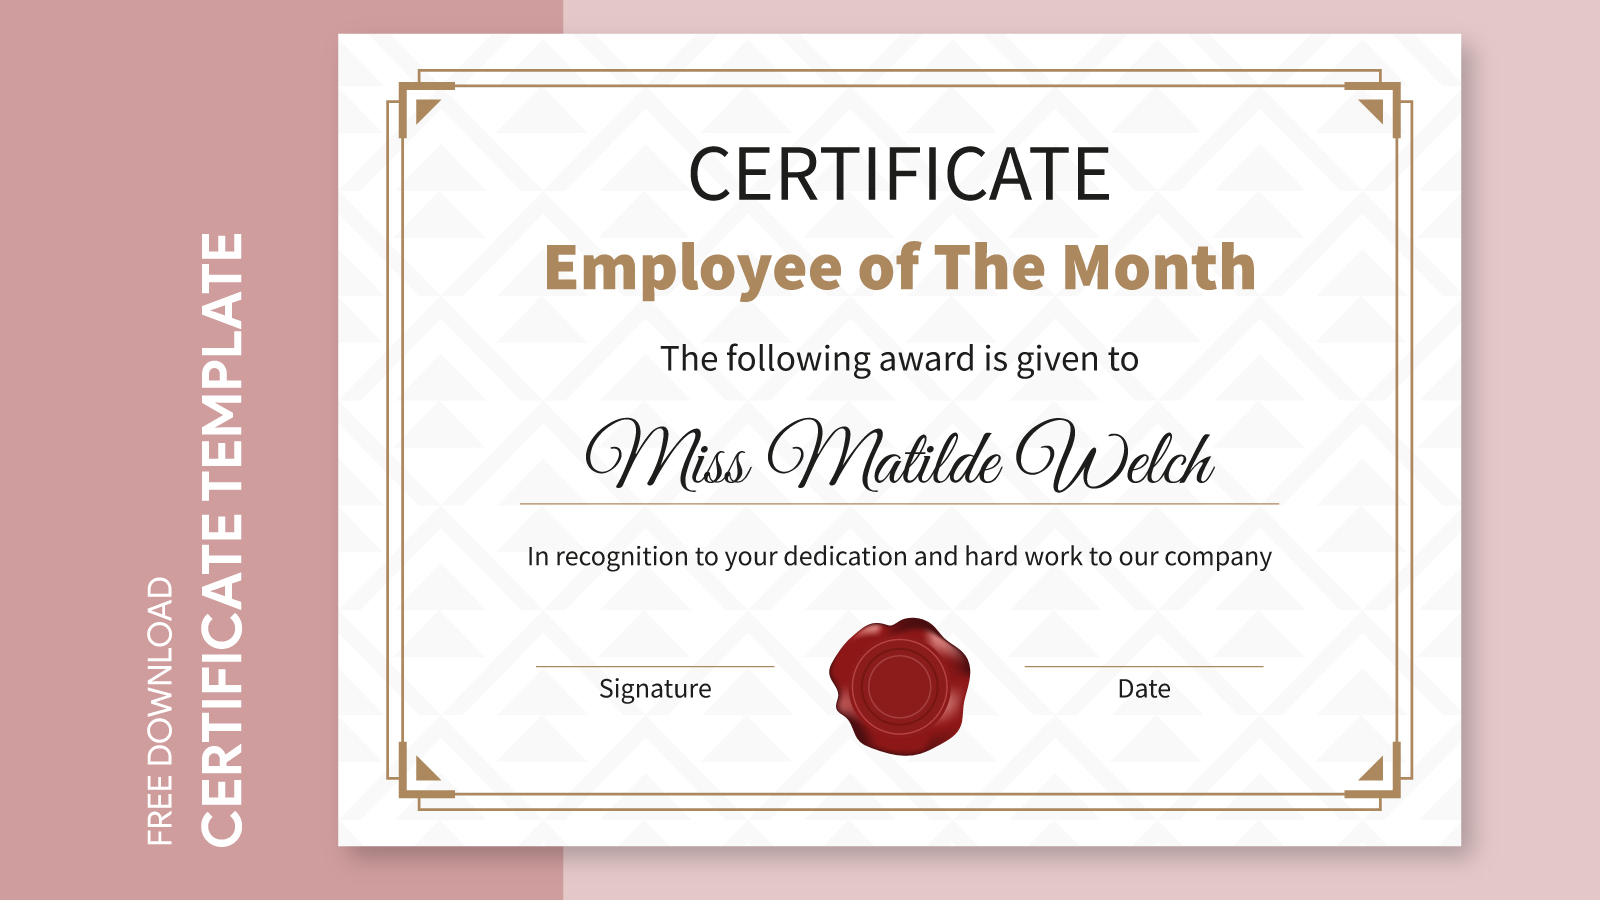 employee of the month certificate template word